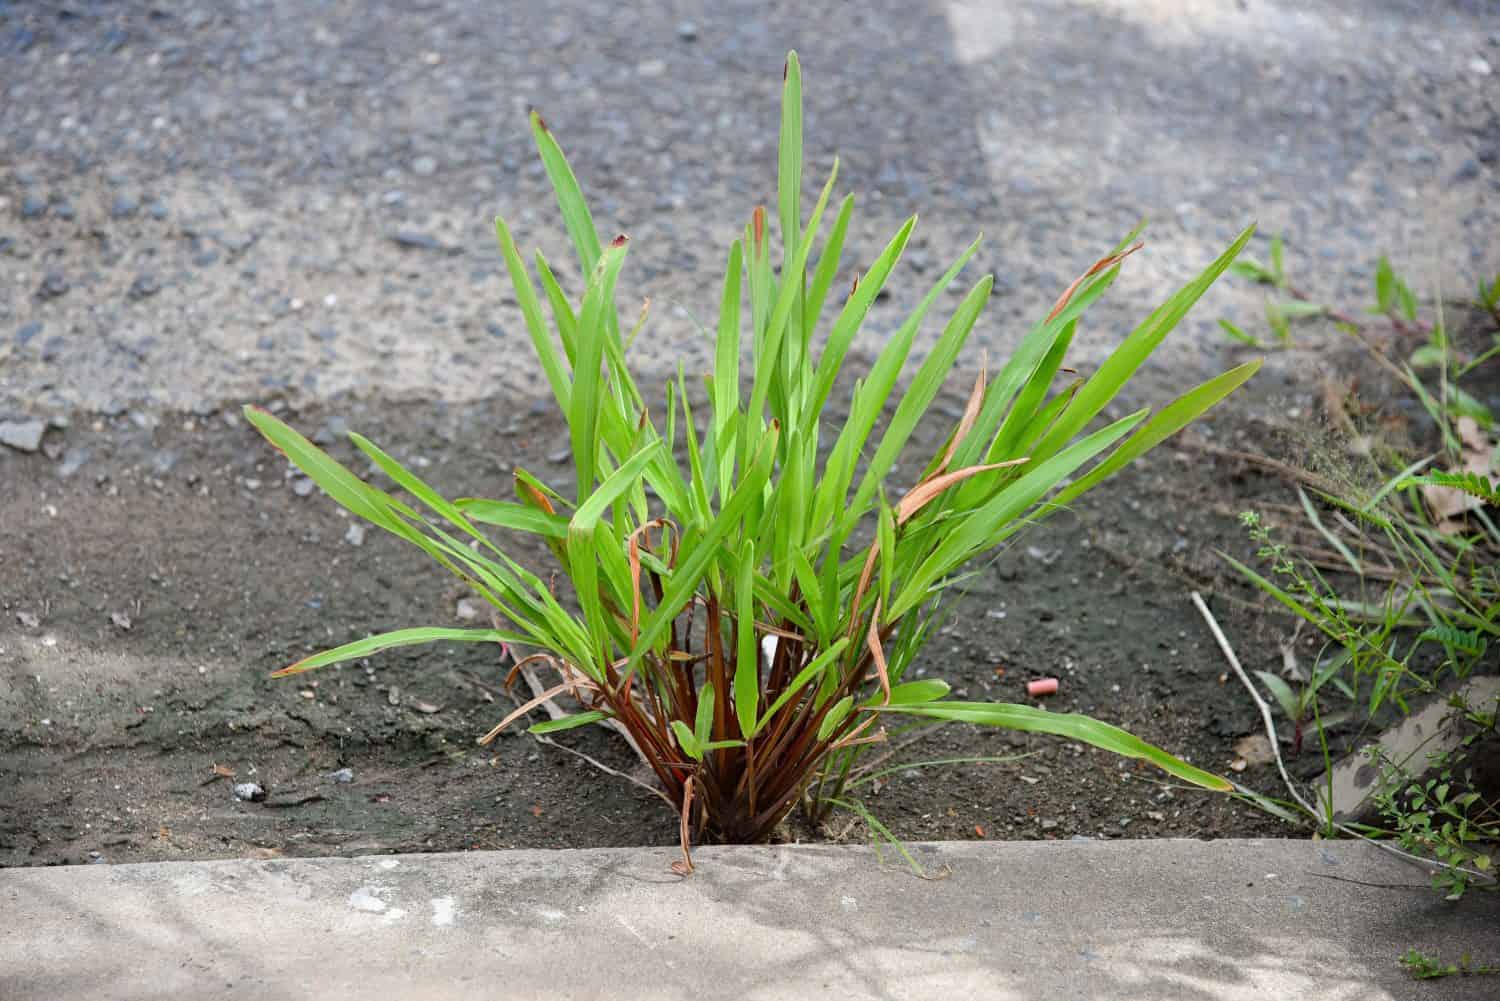 Annual ryegrass (Lolium rigidum) growing by the roadside. commonly known by the names